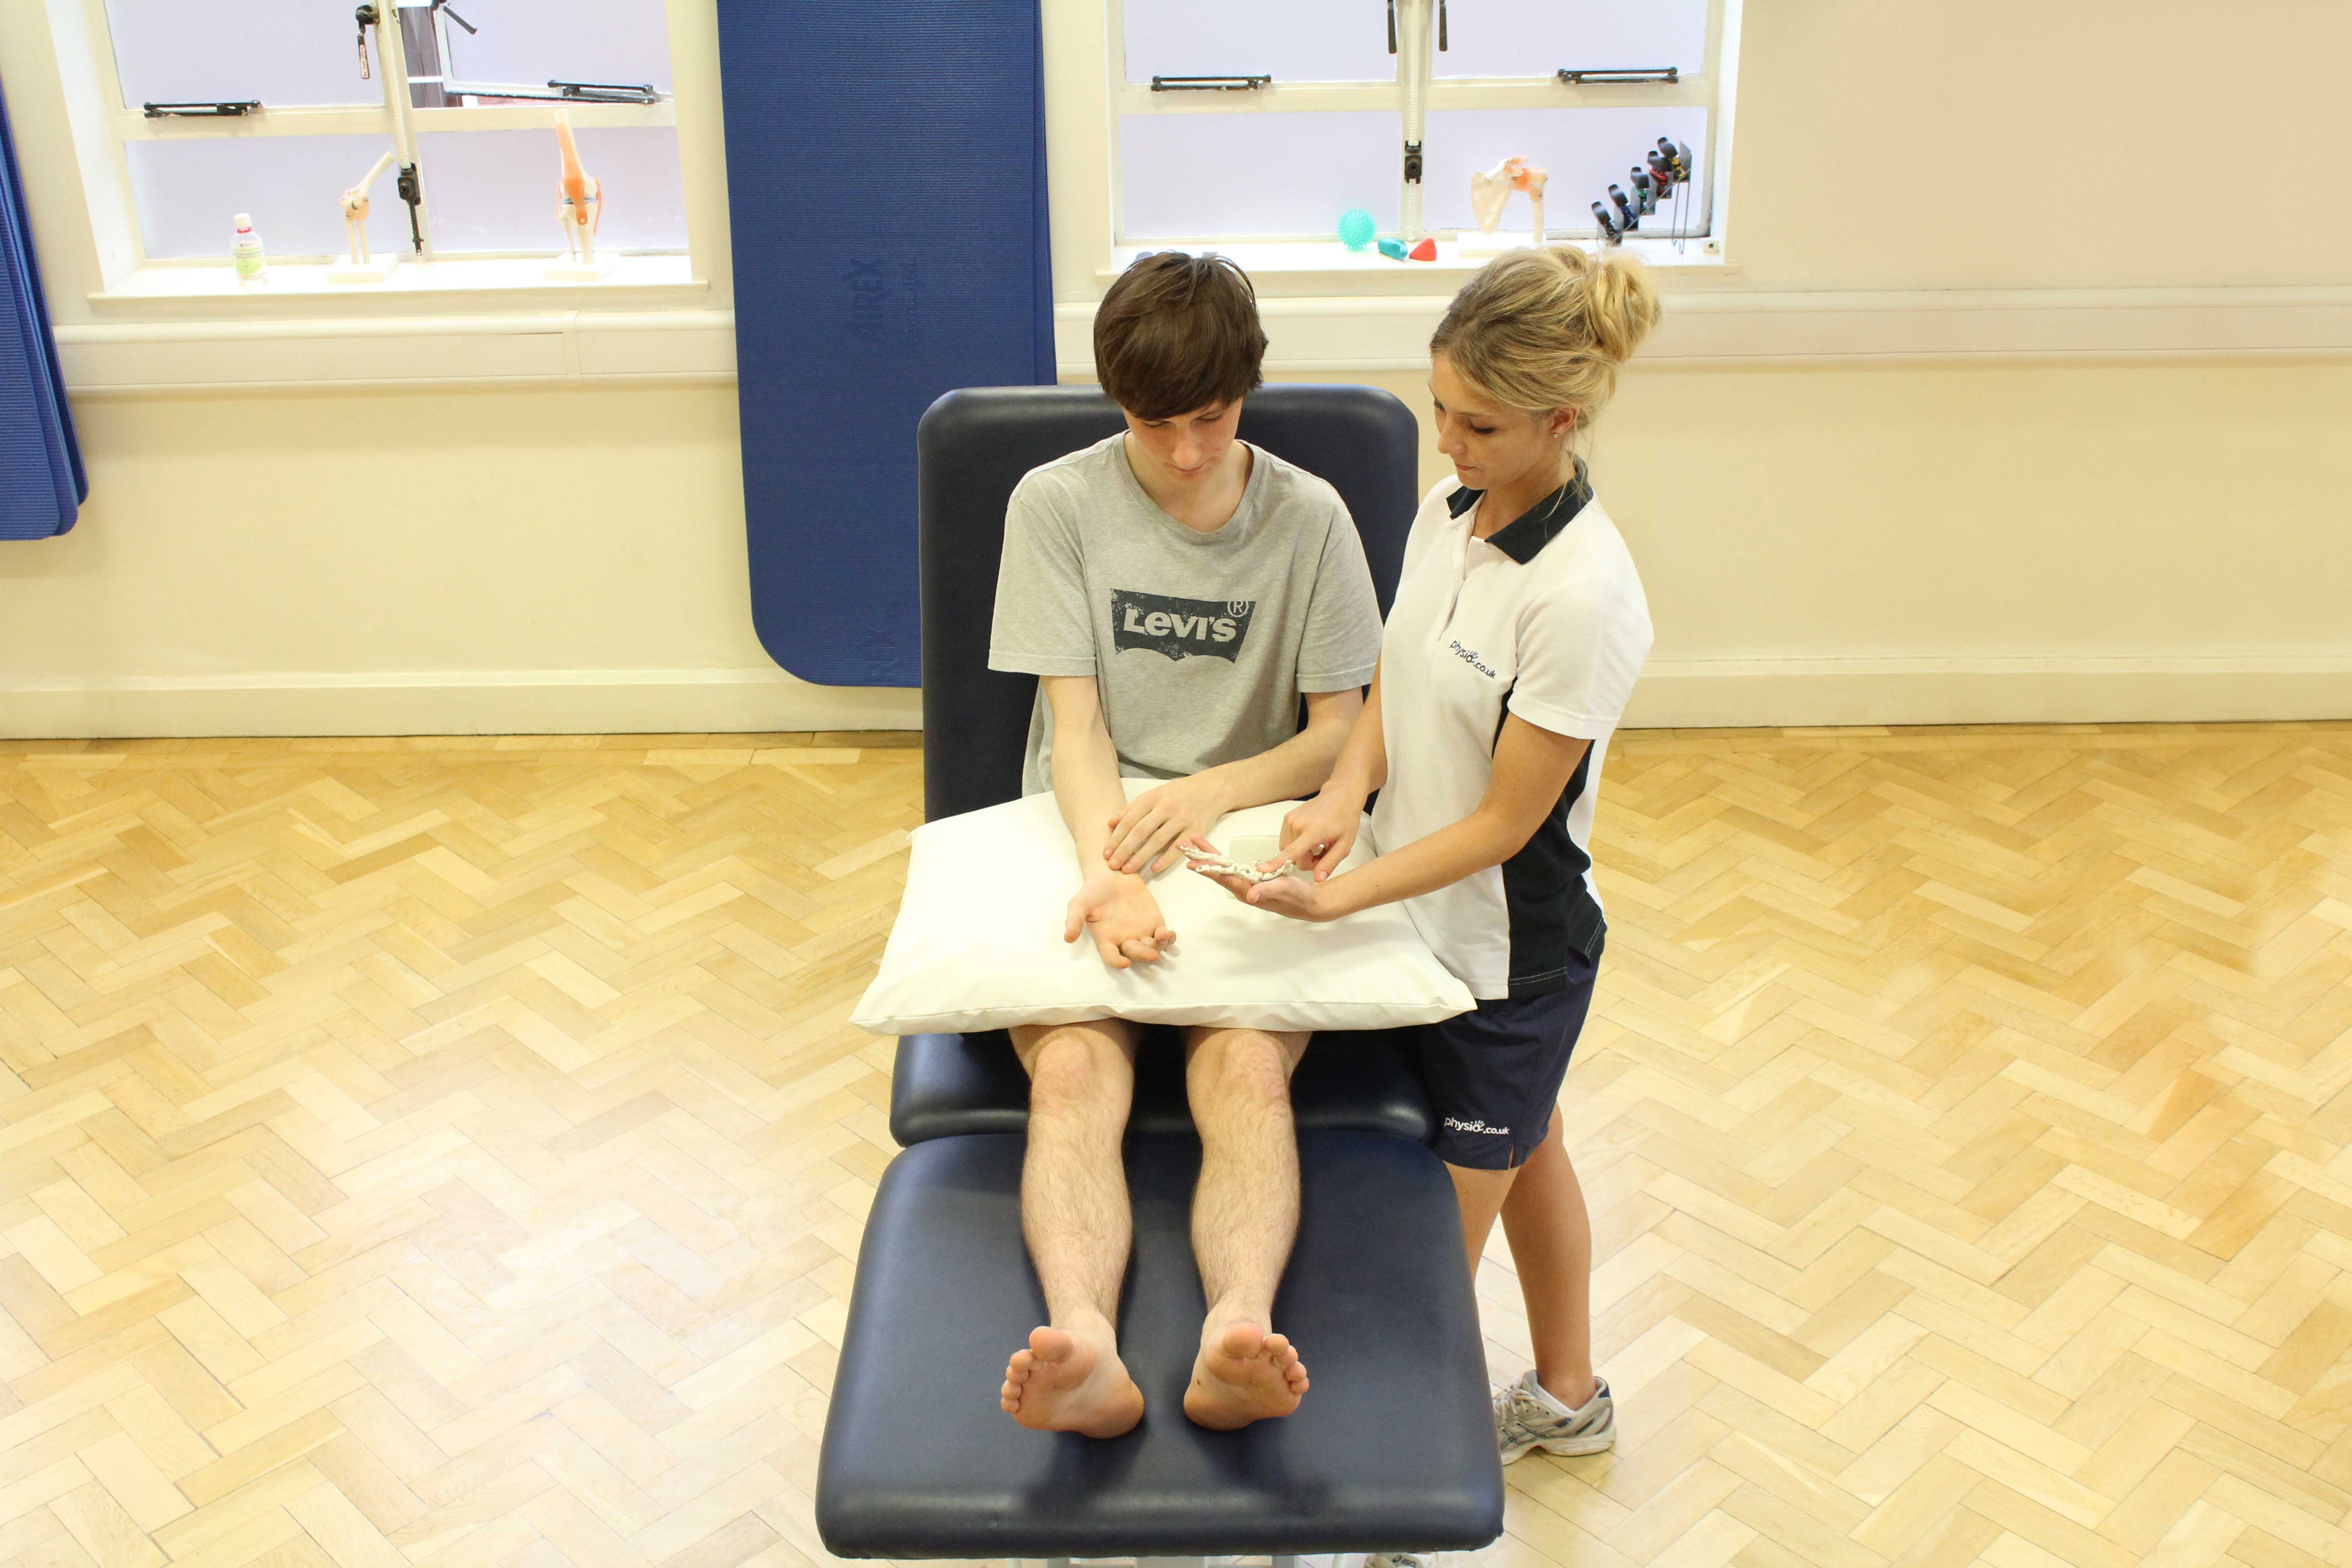 Mobilisations and massage of wrist by specialist physiotherapist